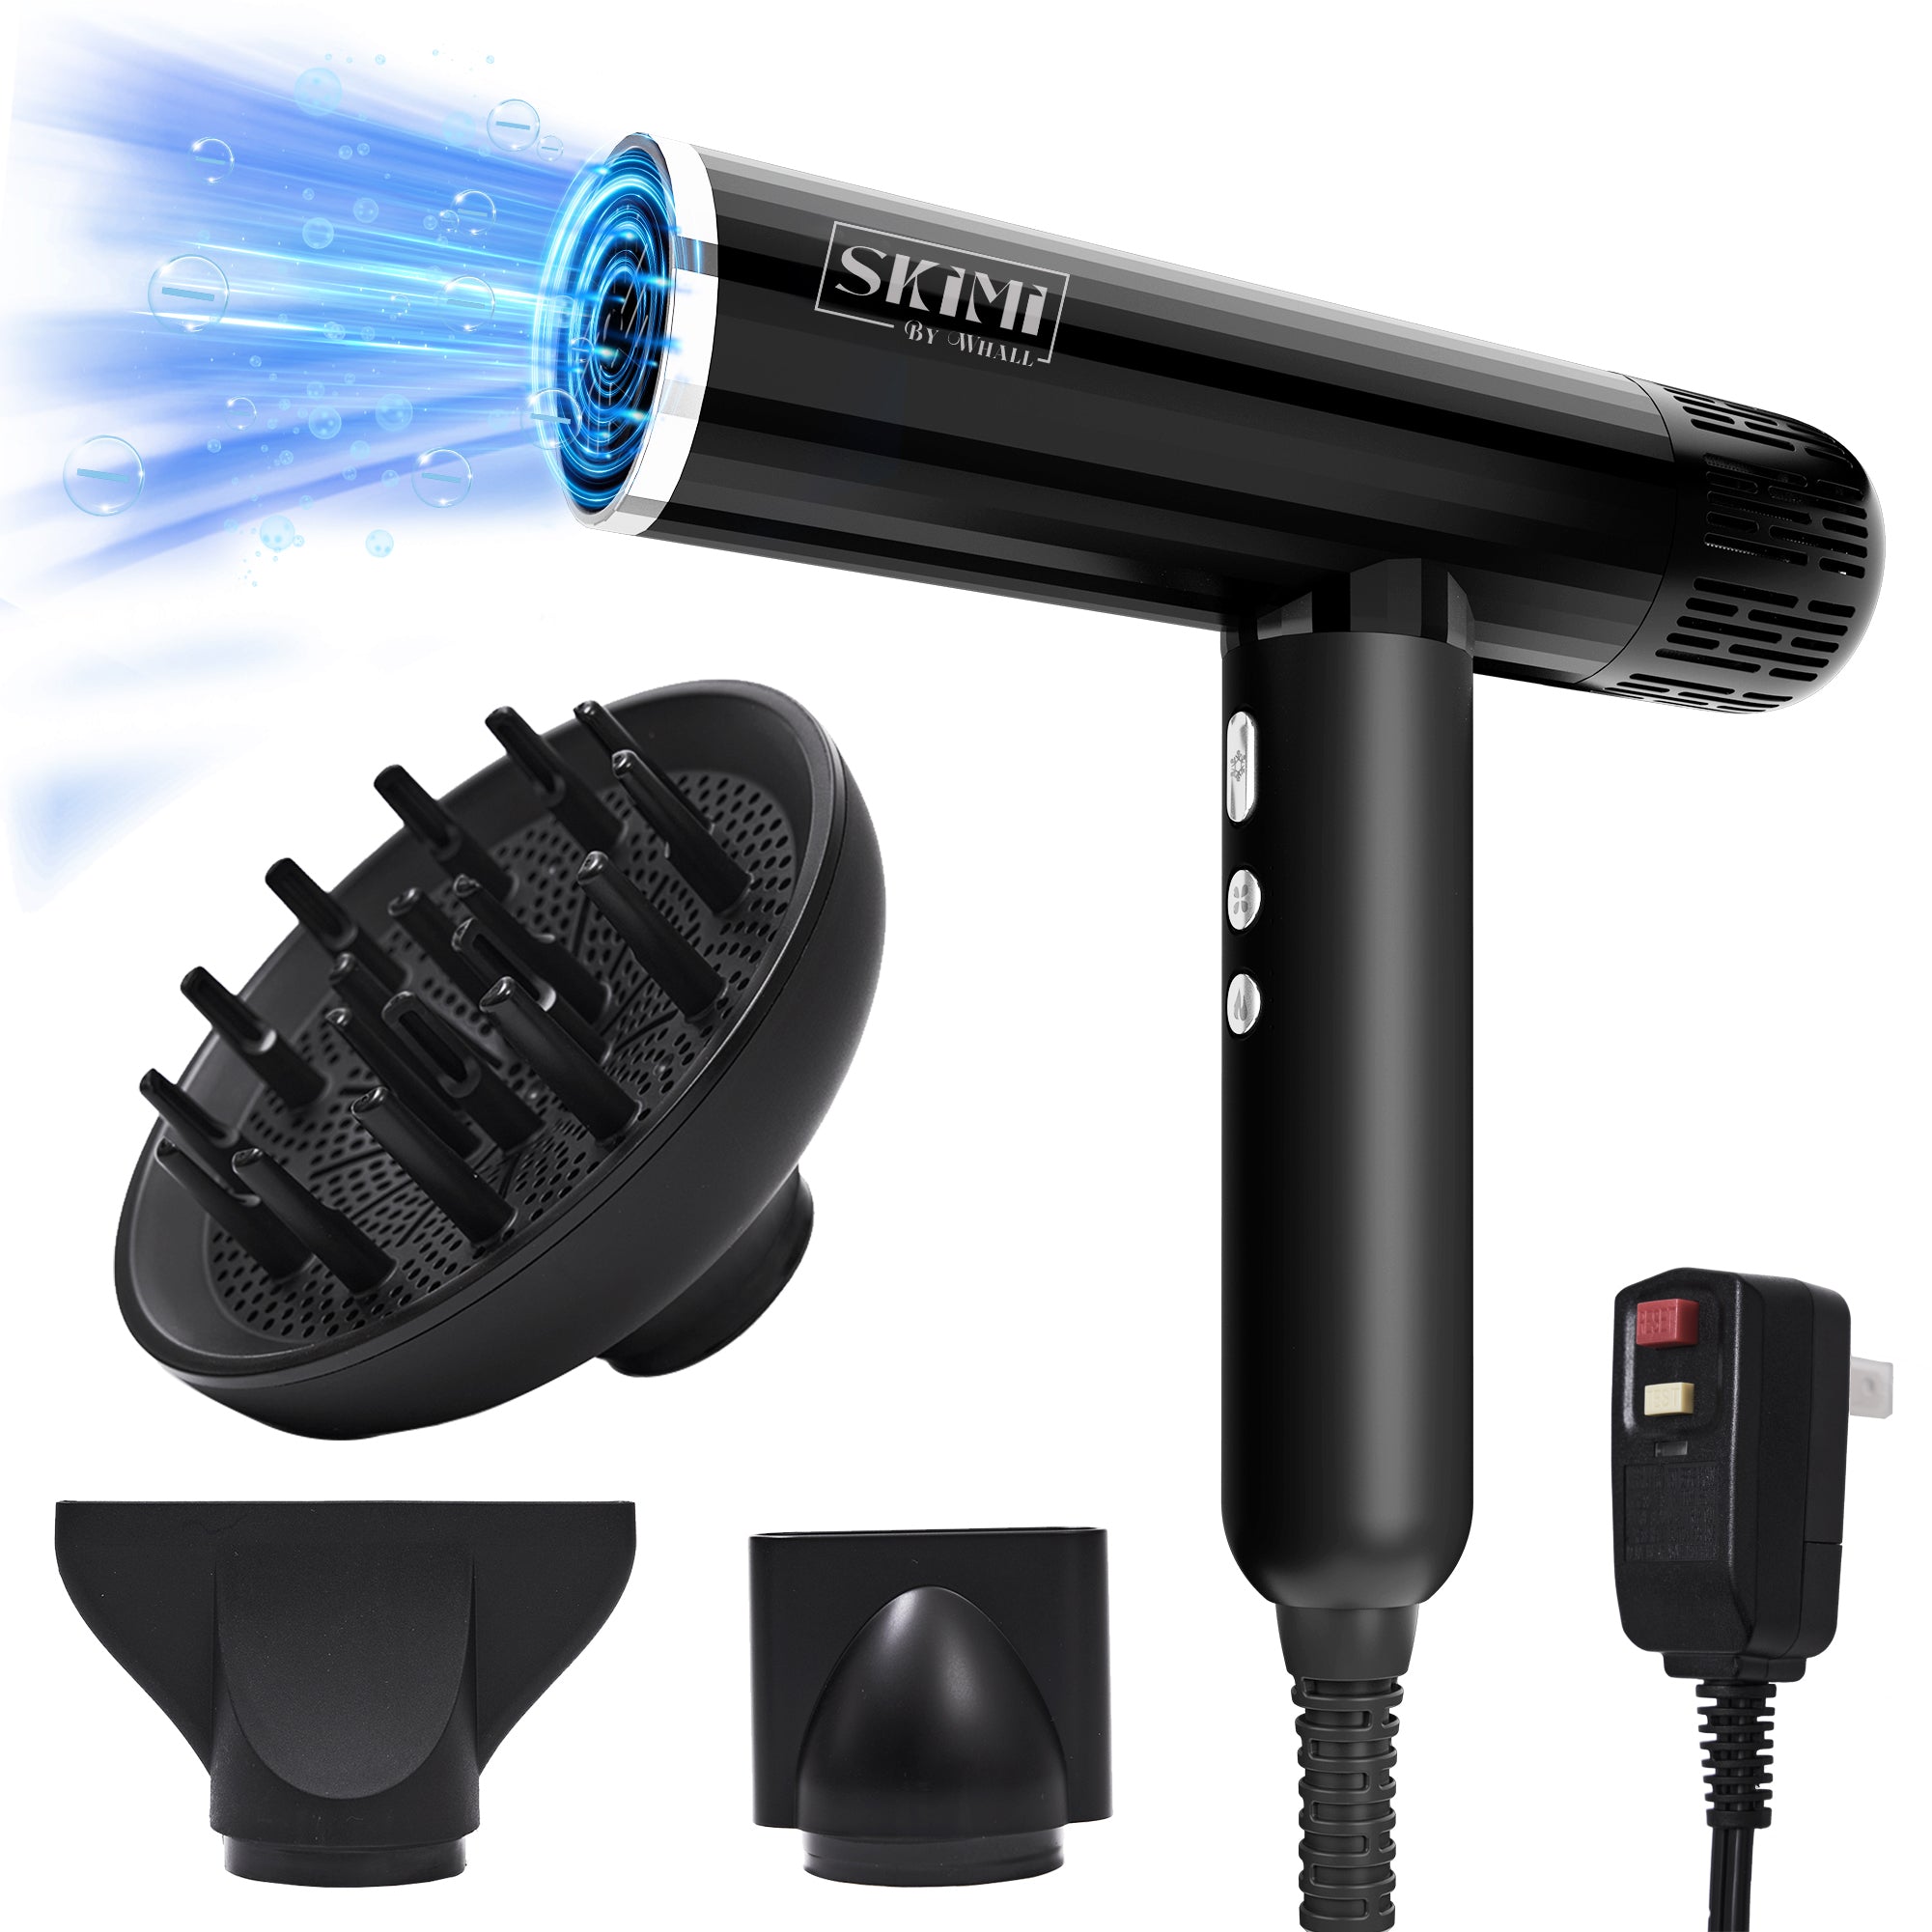 SKIMI by Whall Ionic Hair Dryer, Black Blow Dryer, 110000RPM High-Speed Brushless Motor, Lightweight, 1600W